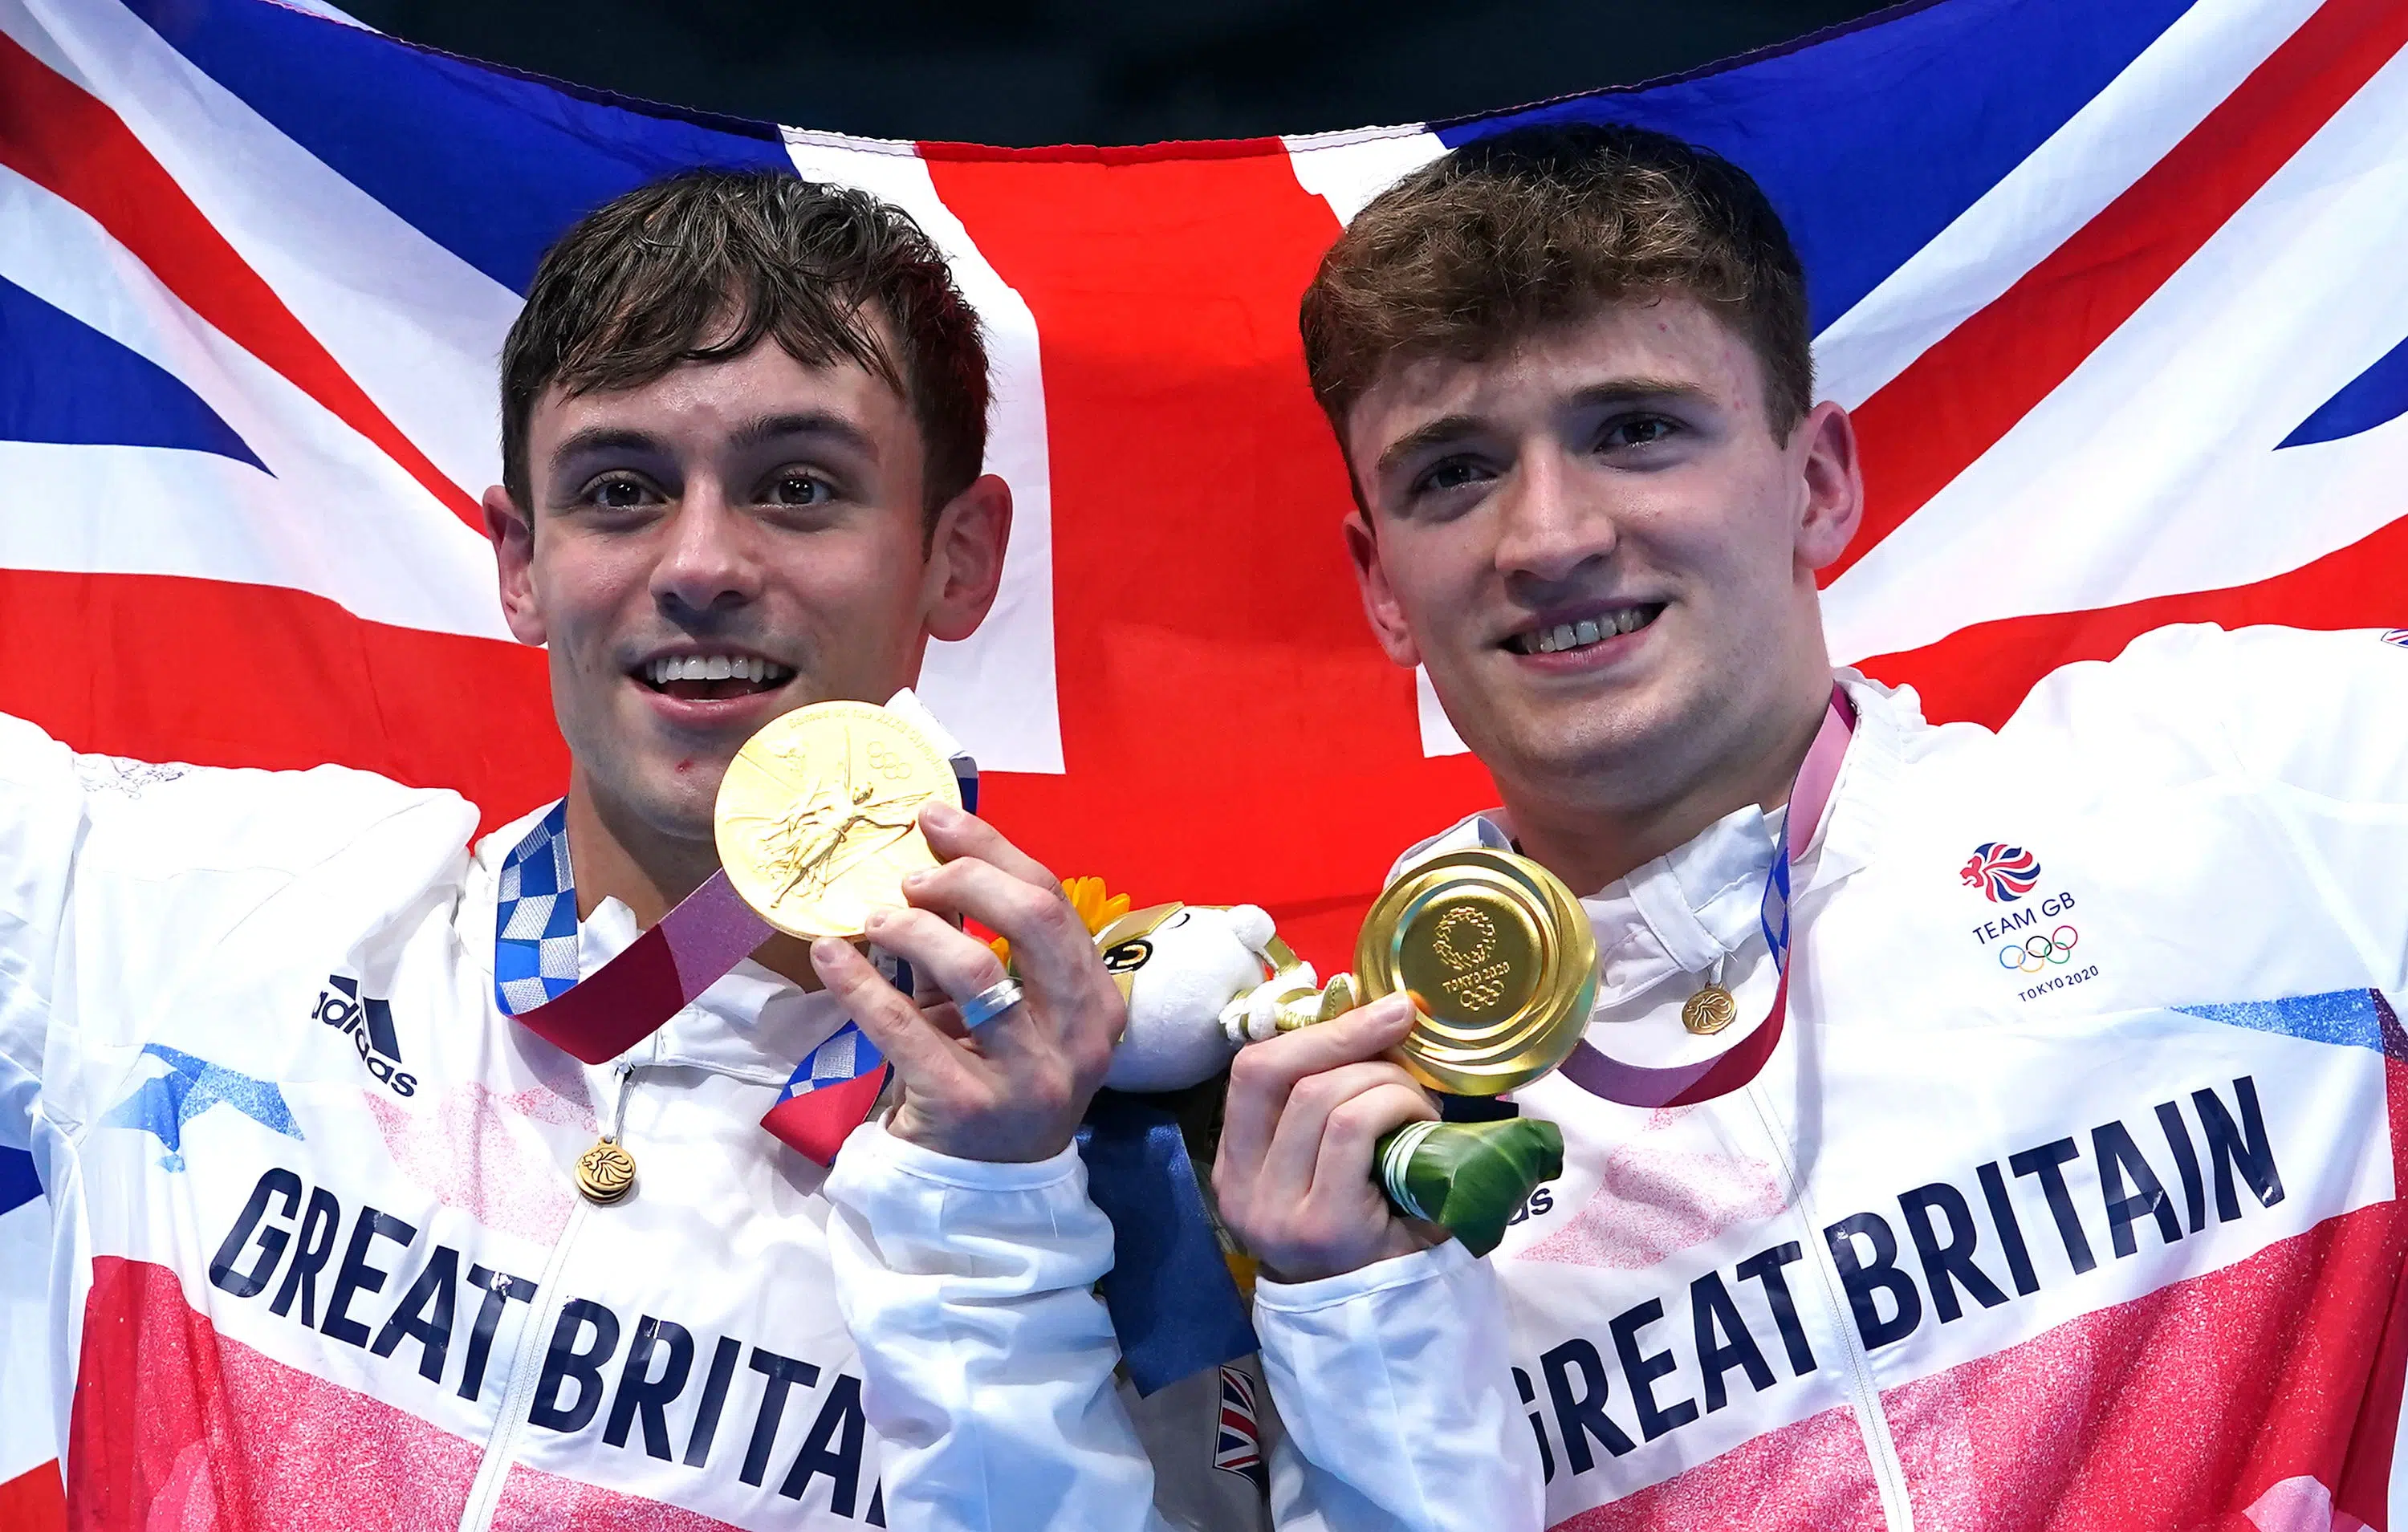 Tom daley and matty lee with gold medals scaled